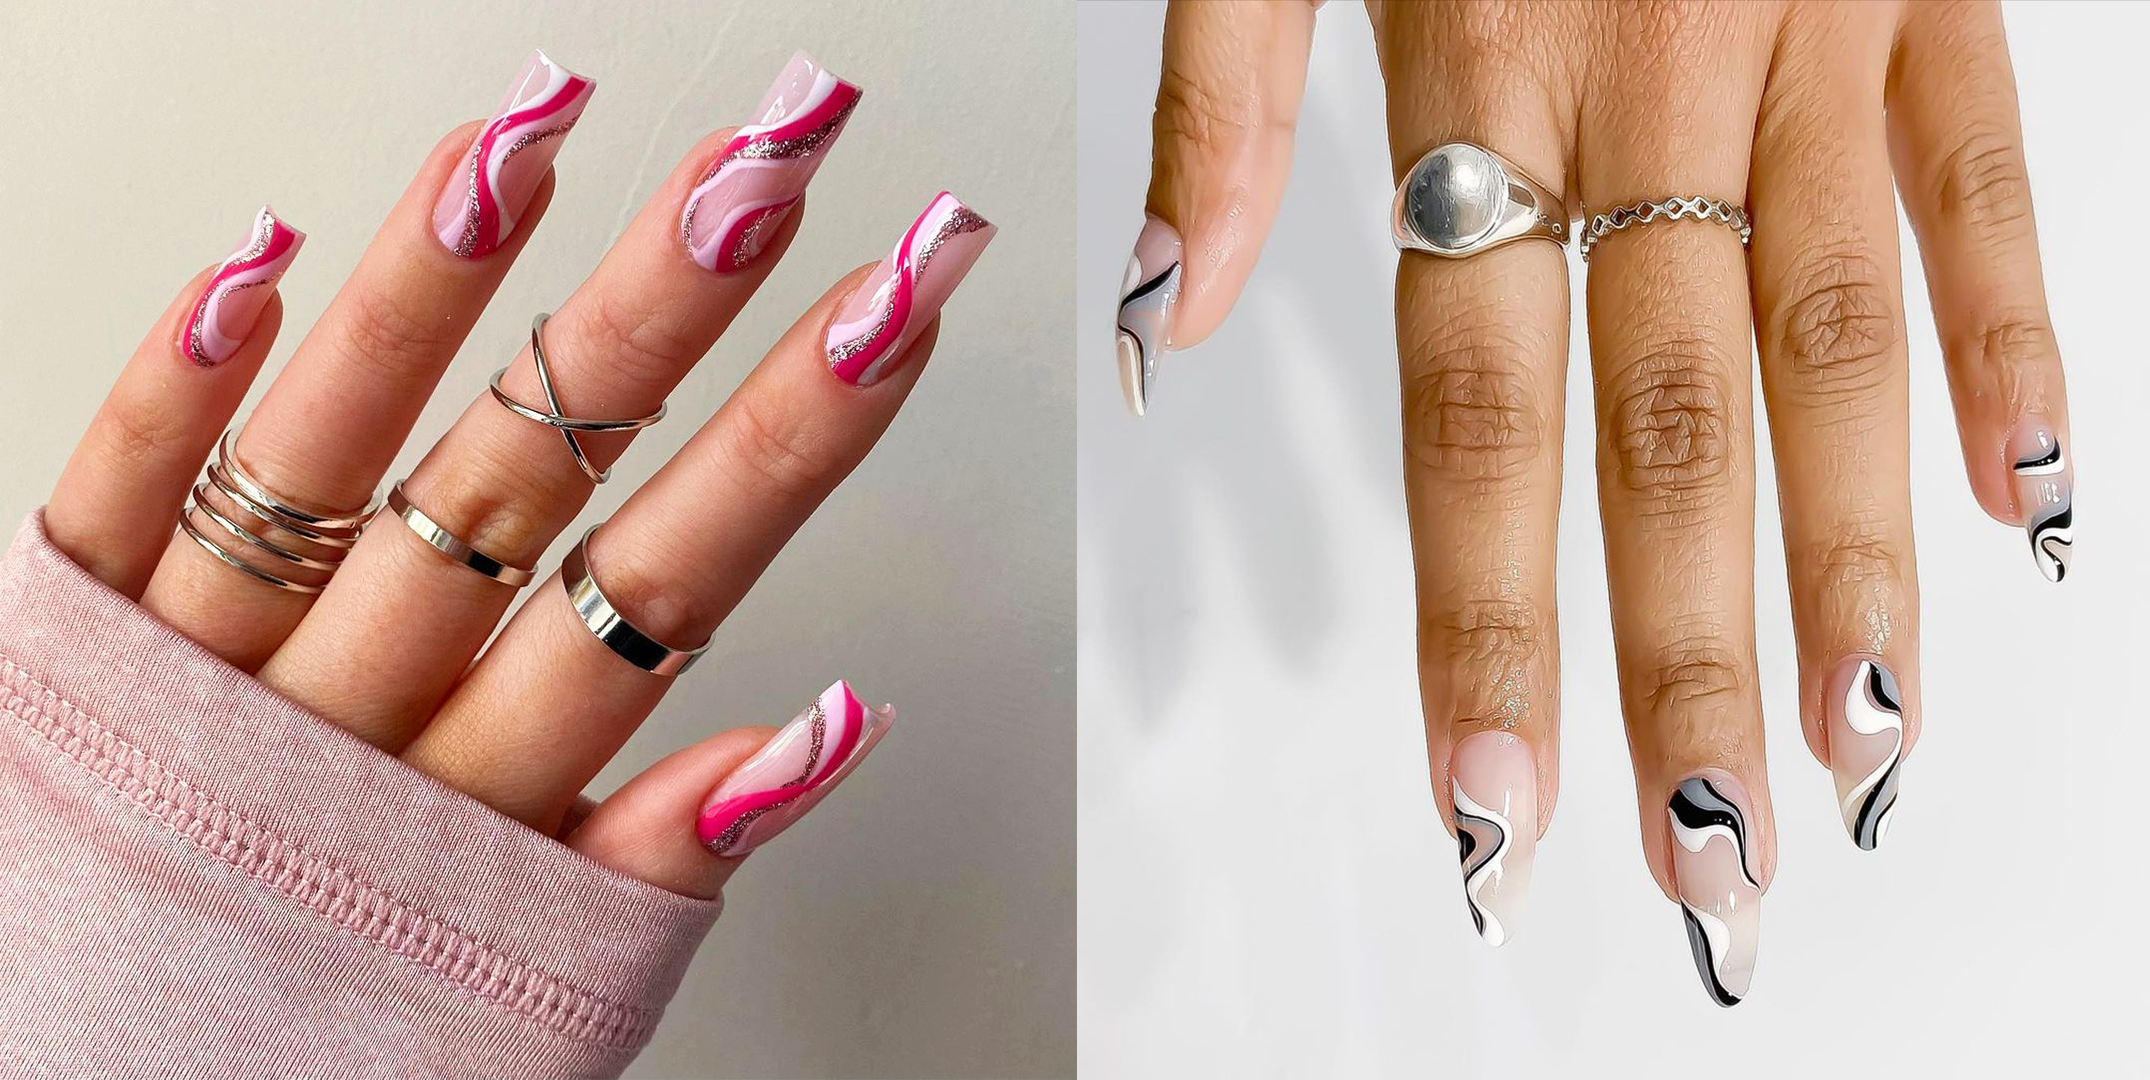 How to Apply Fake Nails: 7 Steps to Ensure Press-On Nails Last